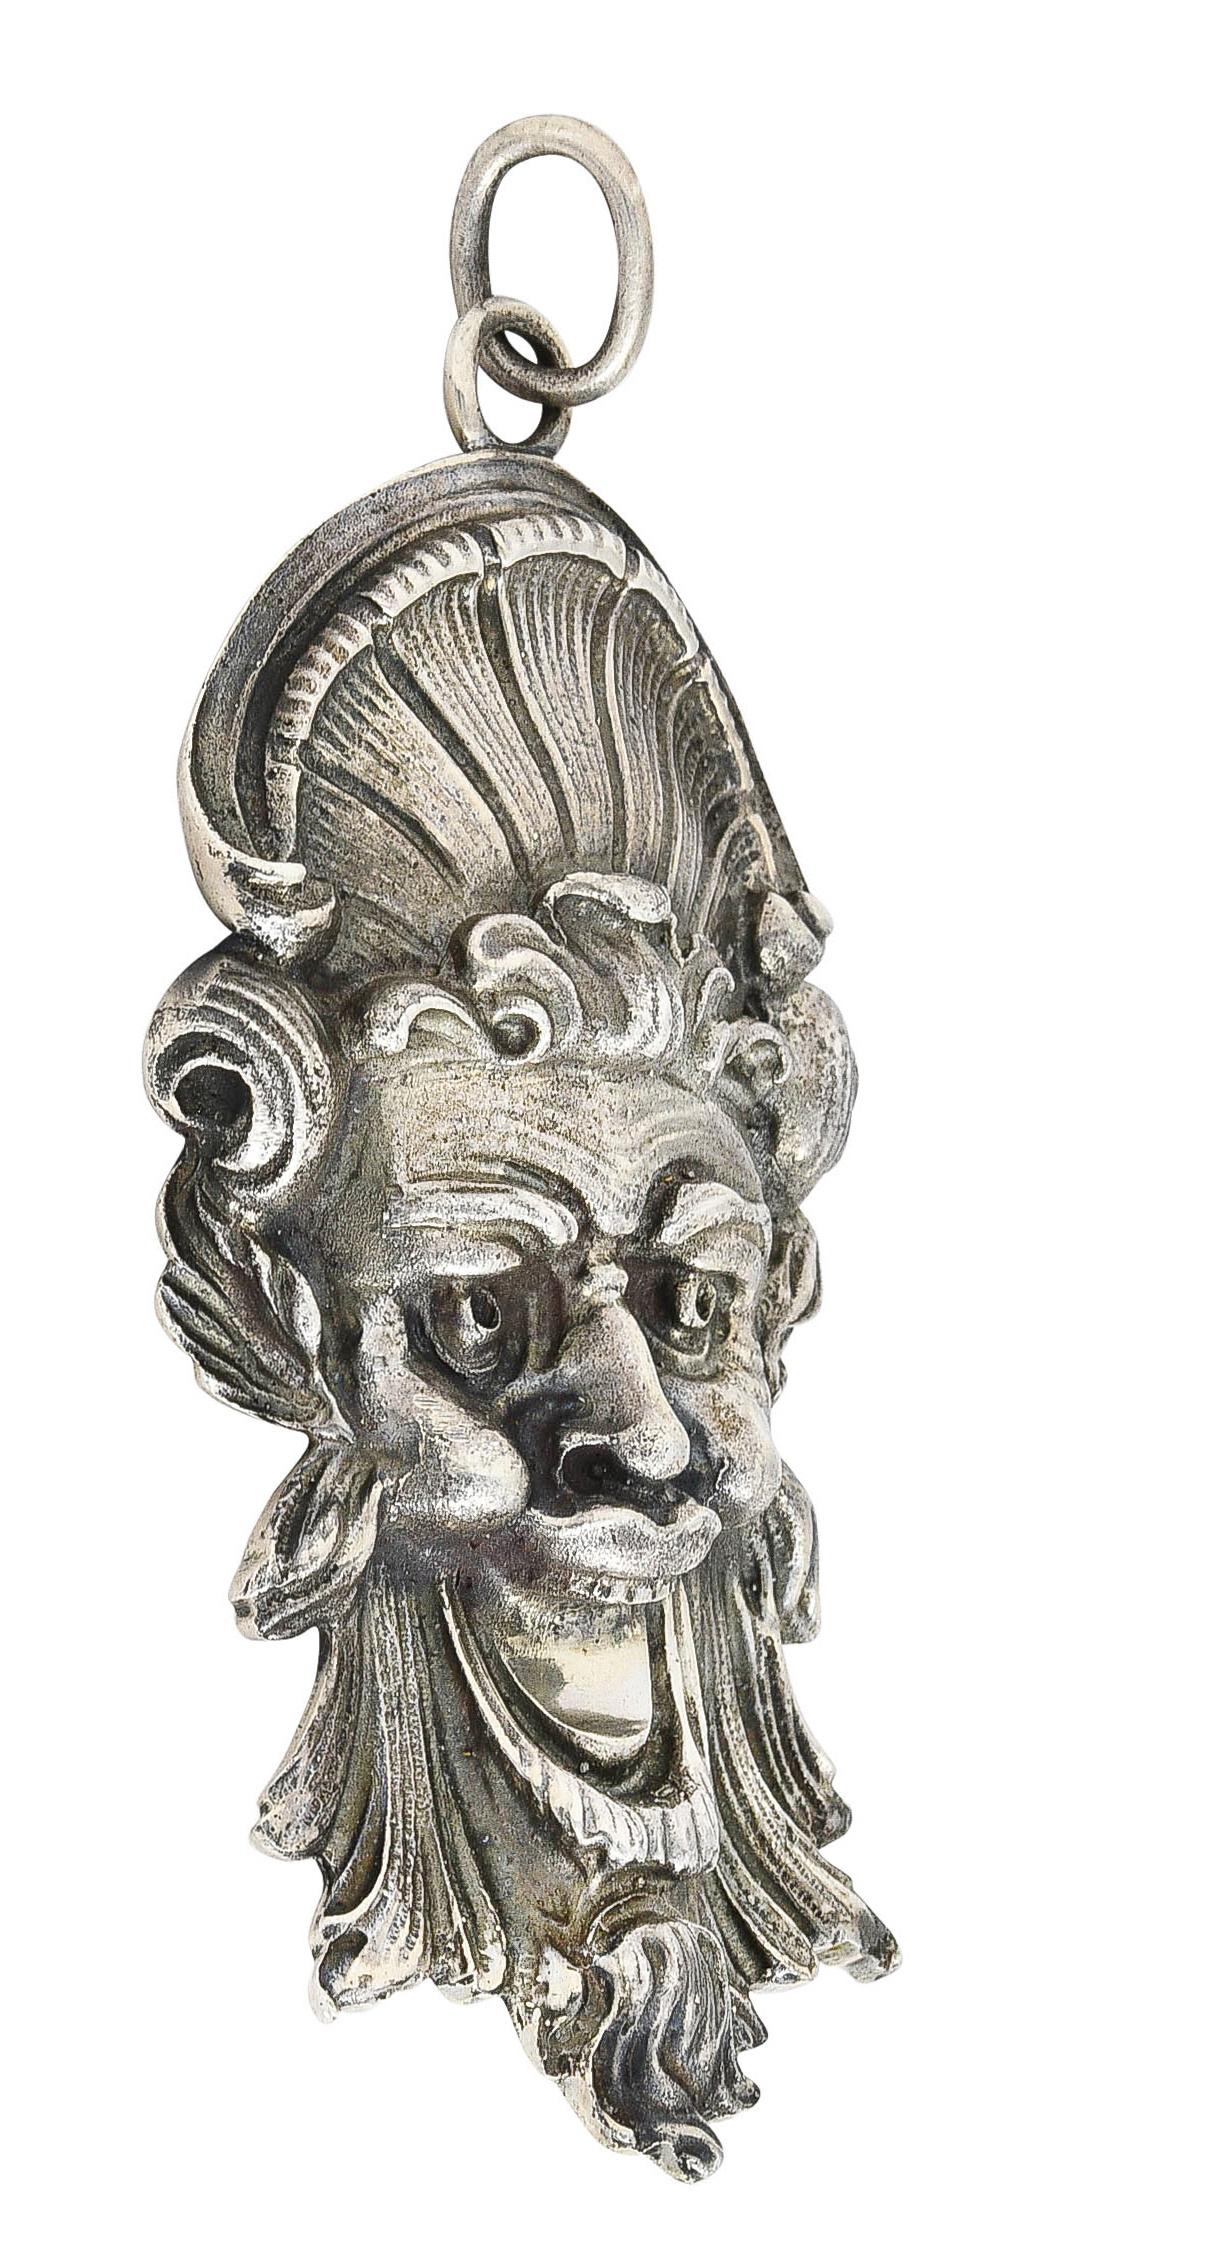 Designed as a highly rendered face of a man with an exaggerated jolly expression. Wearing a fanning headdress with grooved sweeping hair and beard. With oxidized patina throughout. Completed by large jump ring bale. Stamped sterling for sterling